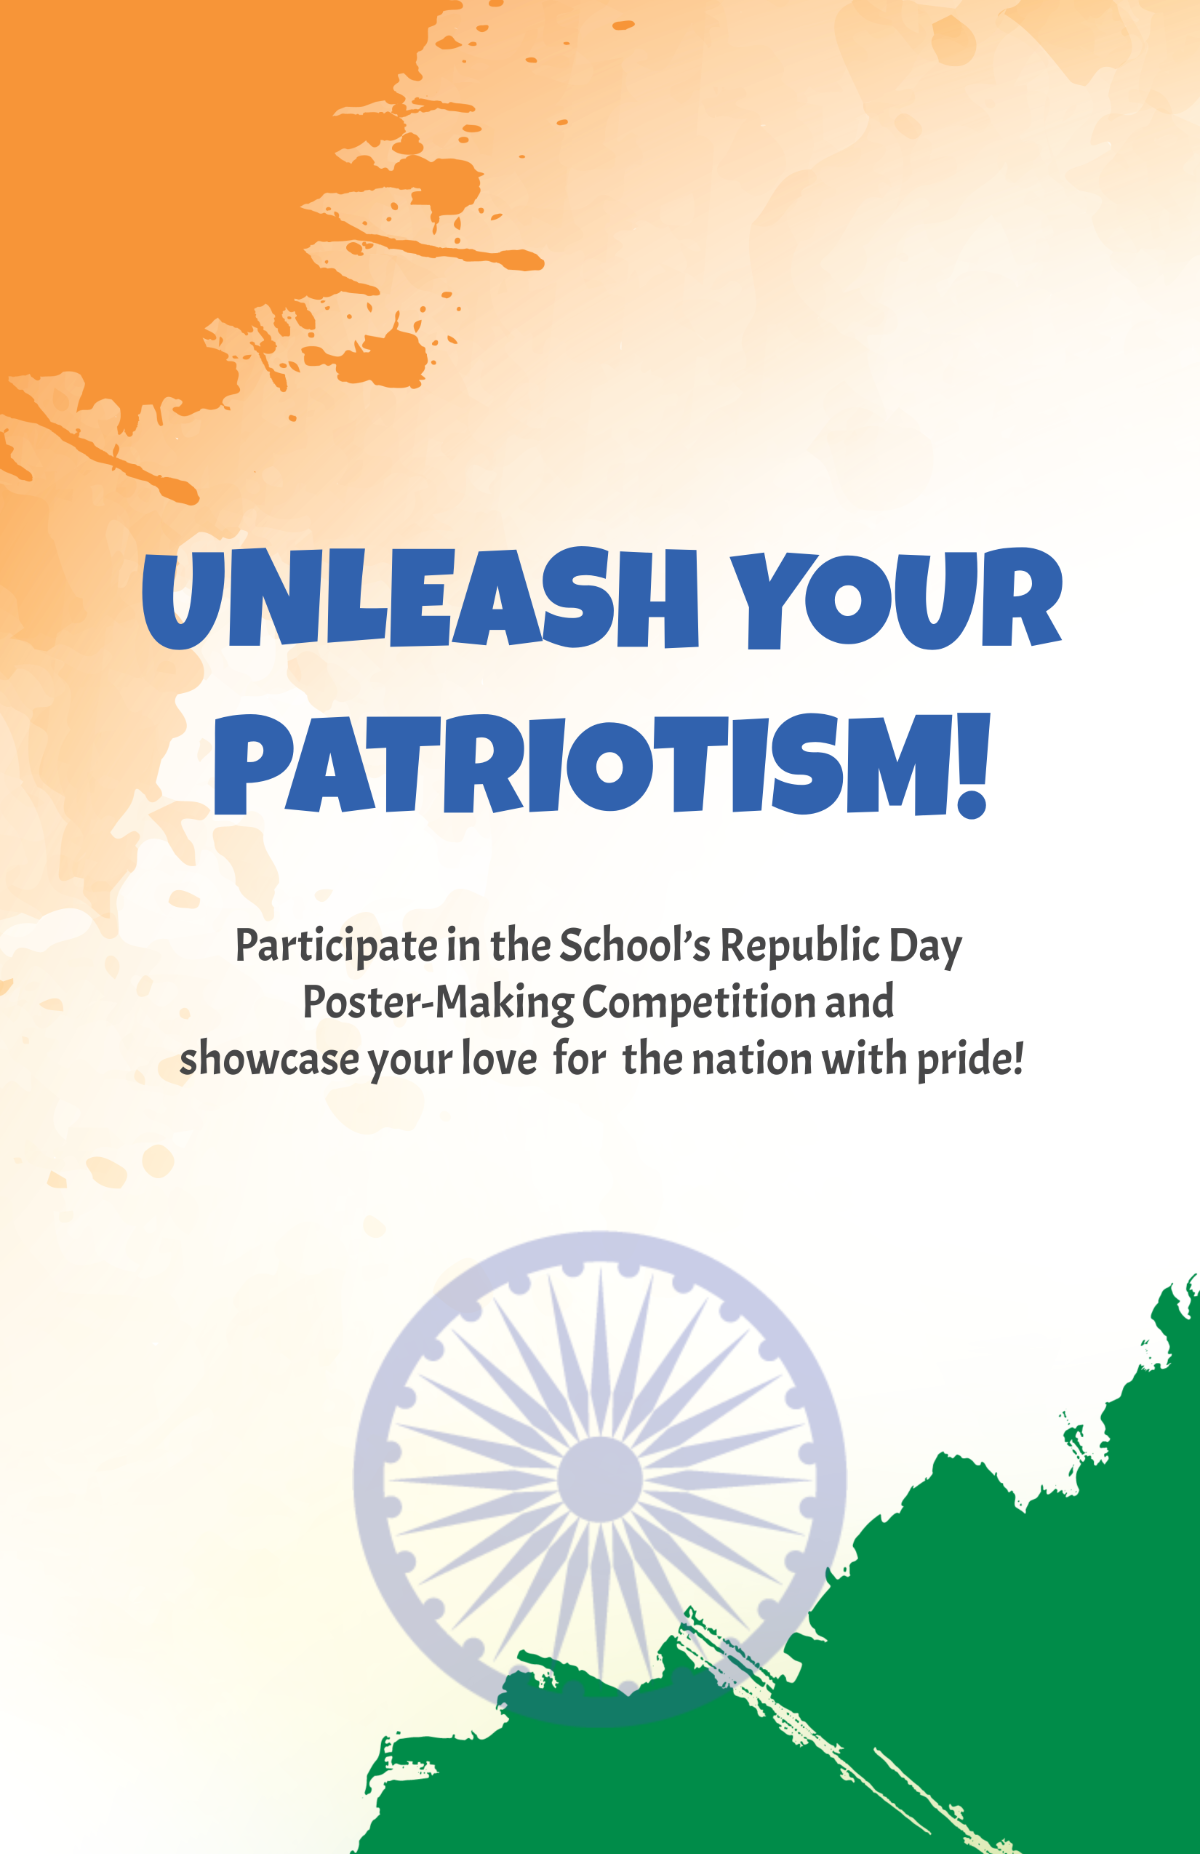 Republic Day Poster for School